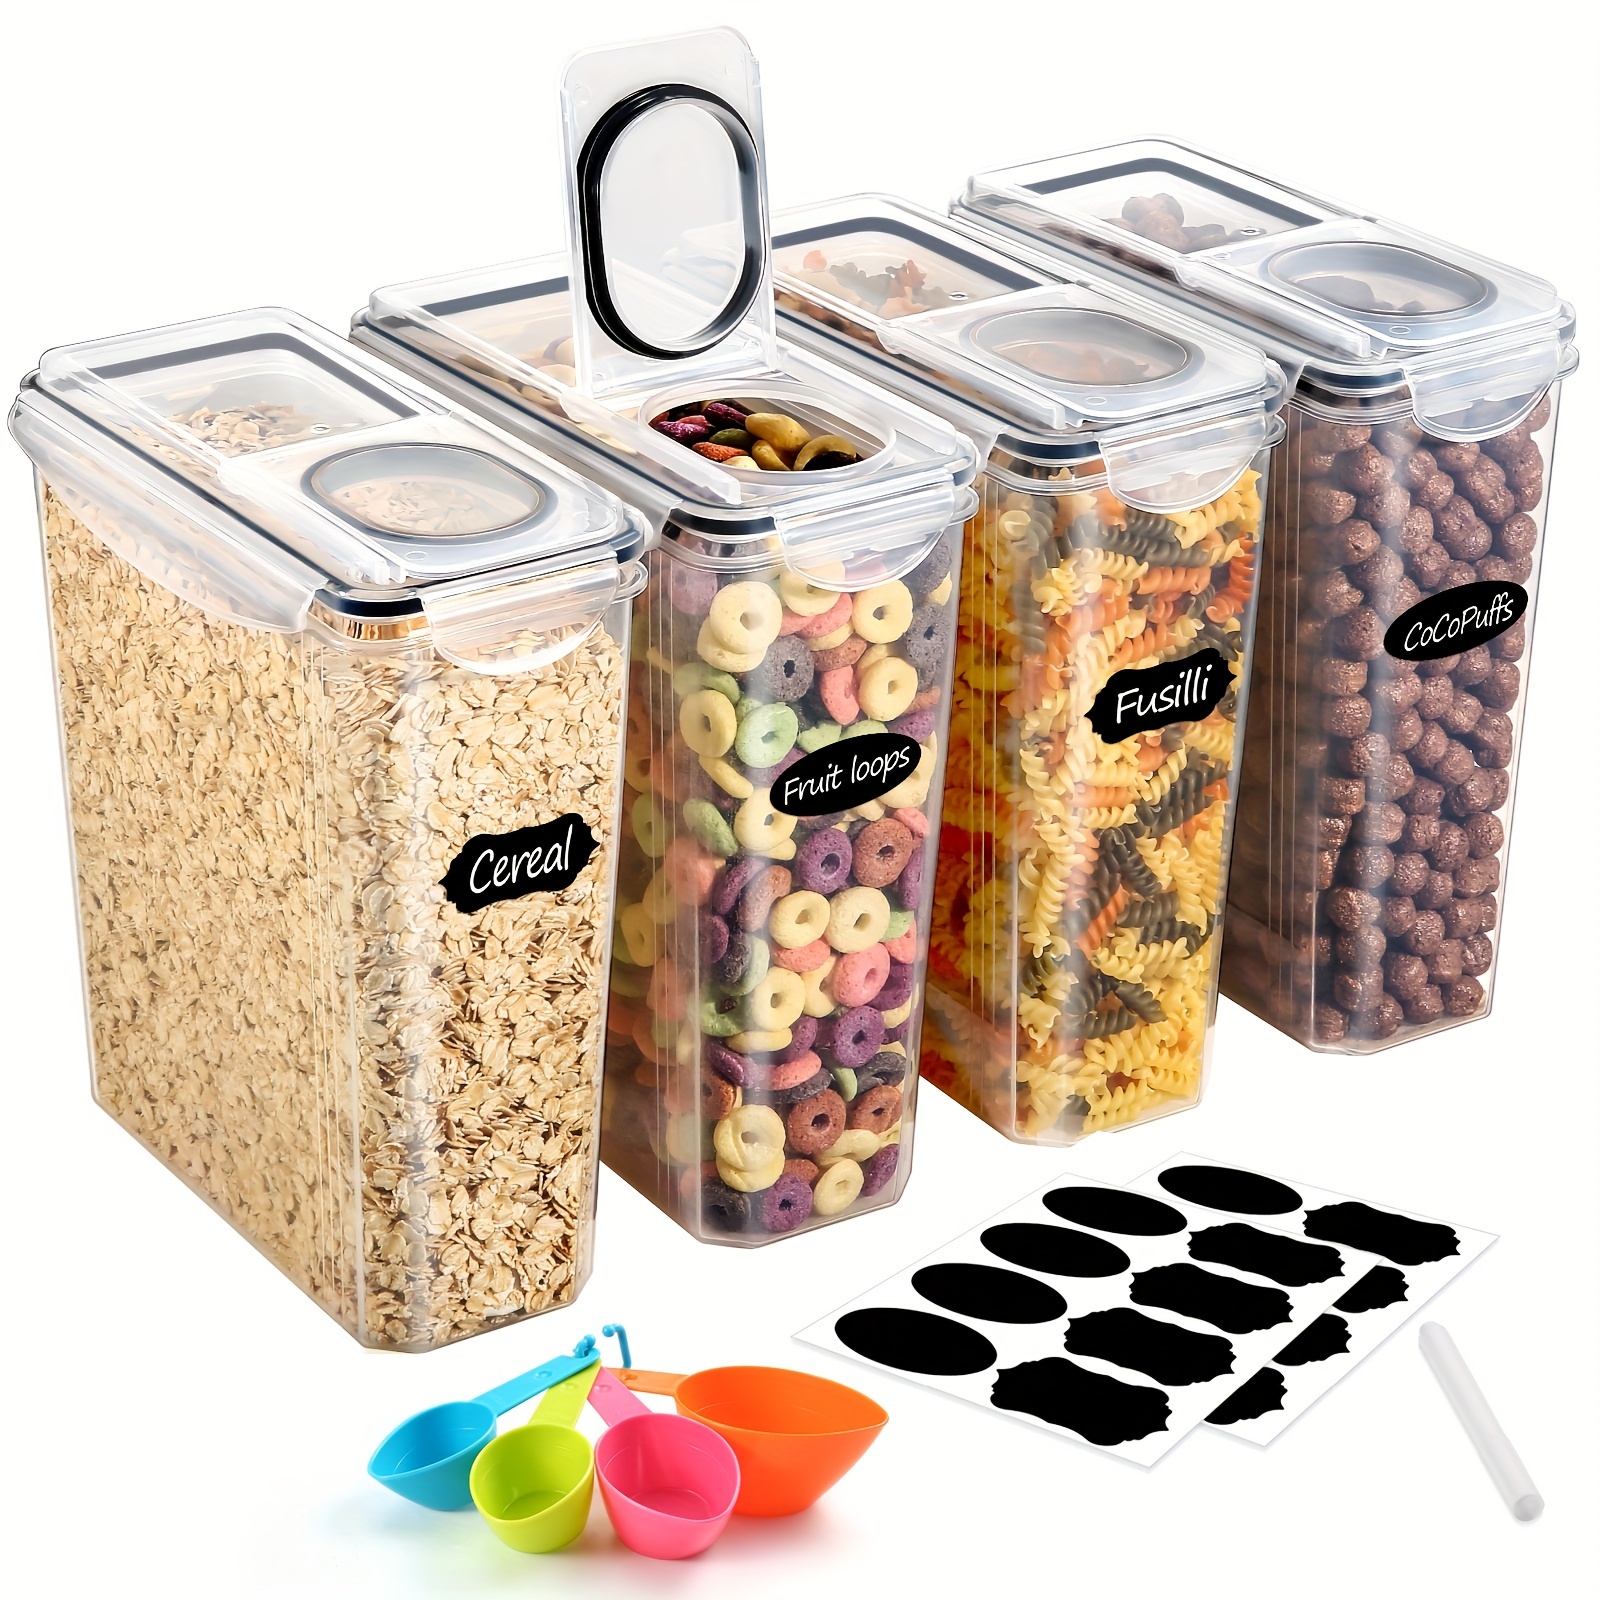 

Cereal Storage Containers Set 4pcs (3.7l/125oz), Airtight Plastic Food Containers With Lids, Bpa Free Food Storage Containers For Kitchen Pantry Organization, With 16 Labels & 1 Marker